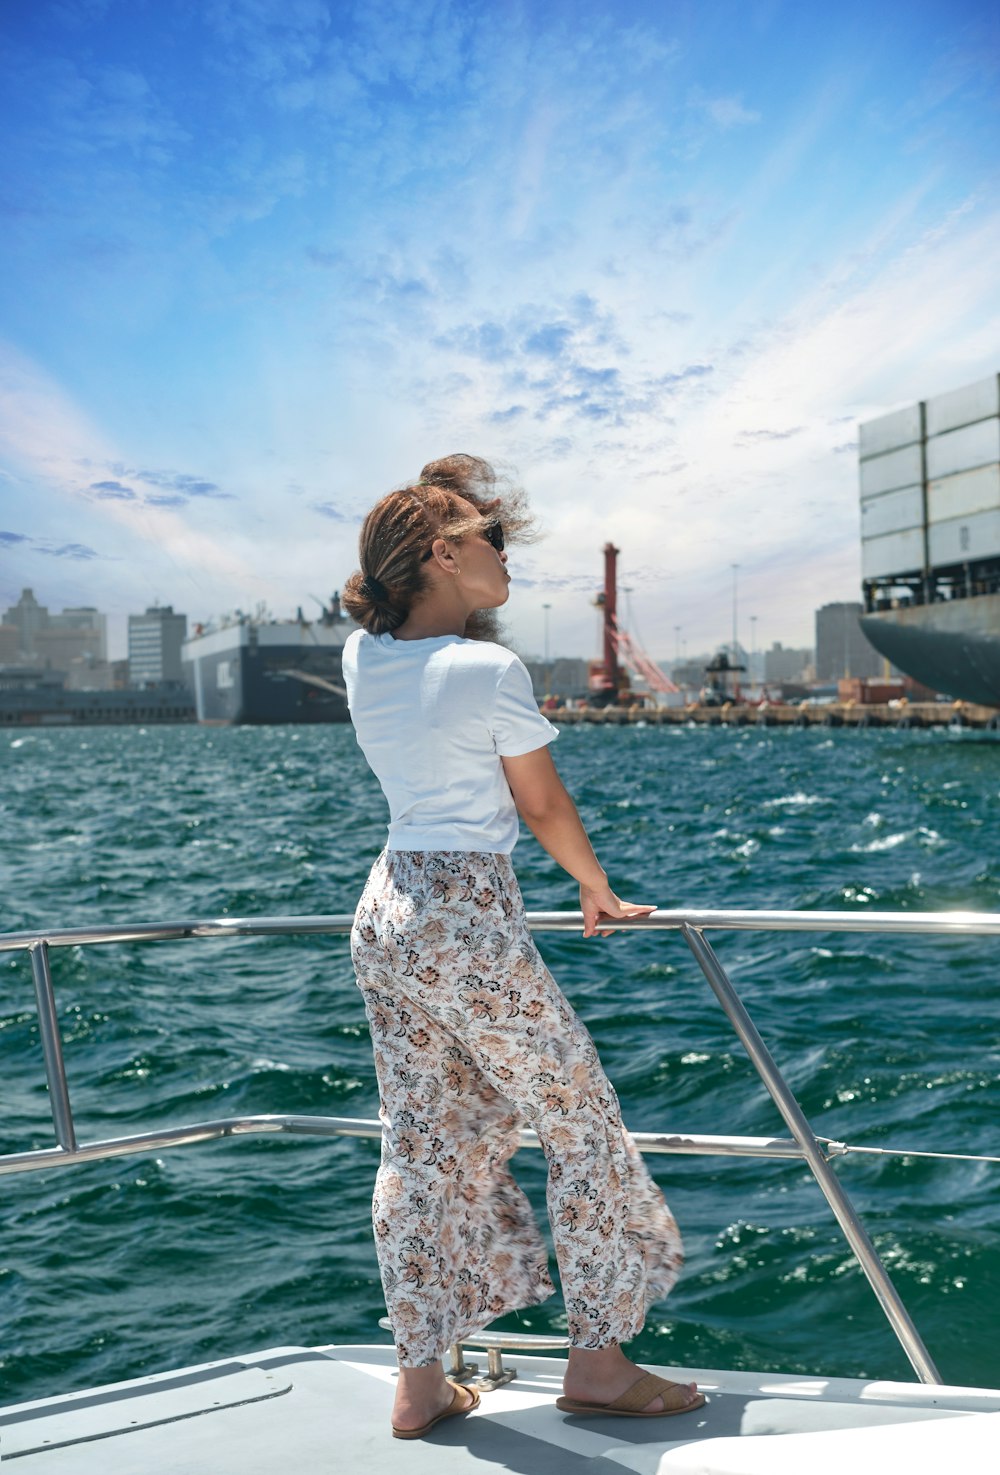 woman in white t-shirt and black and white floral skirt standing on boat during daytime